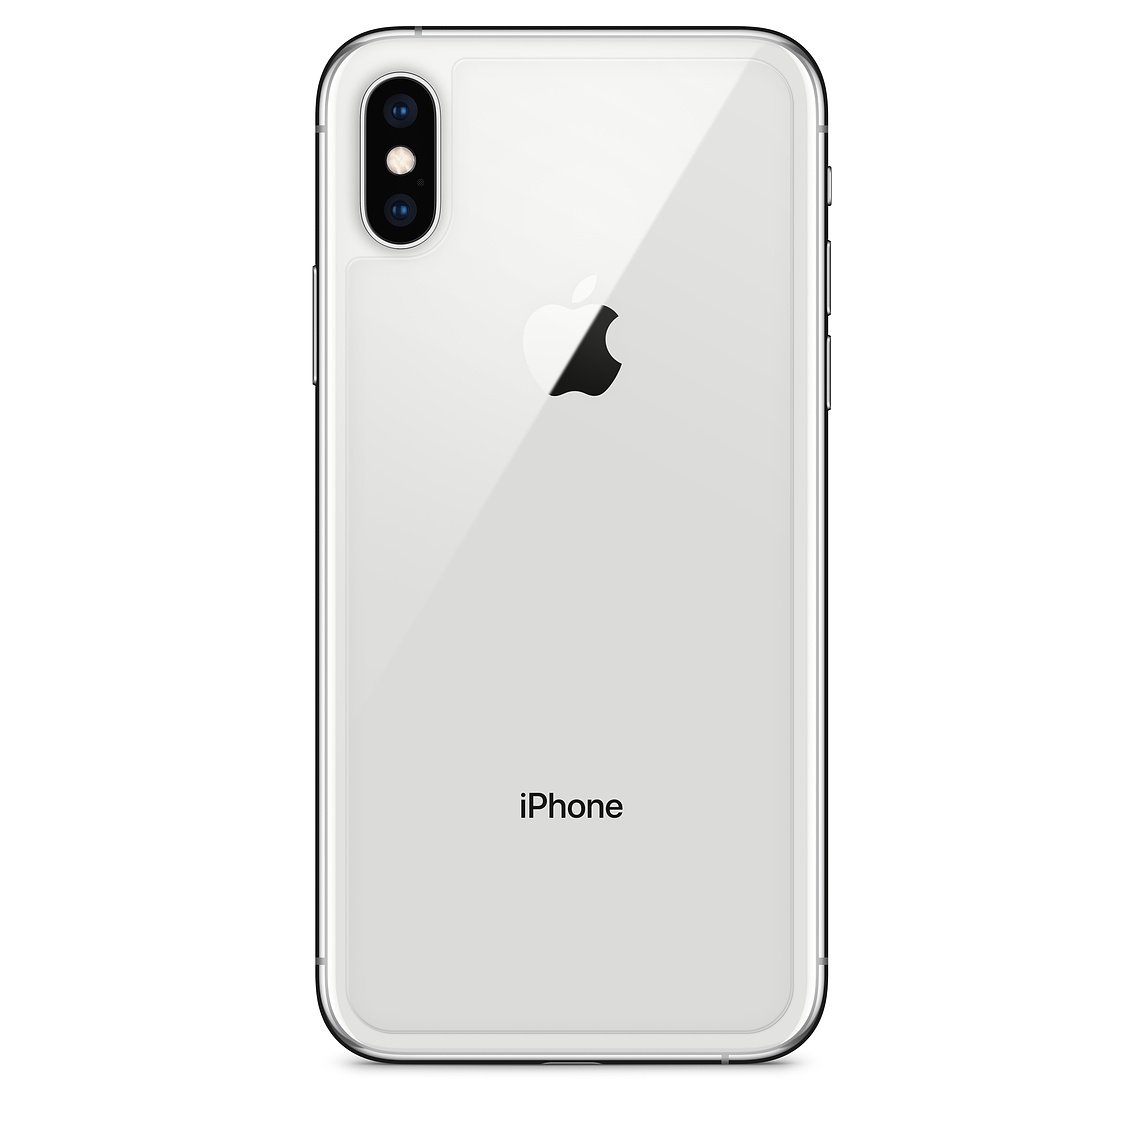 Apple, iPhone X, 64GB, Unlocked to any Network, 12 Months Warranty – 64GB / Silver